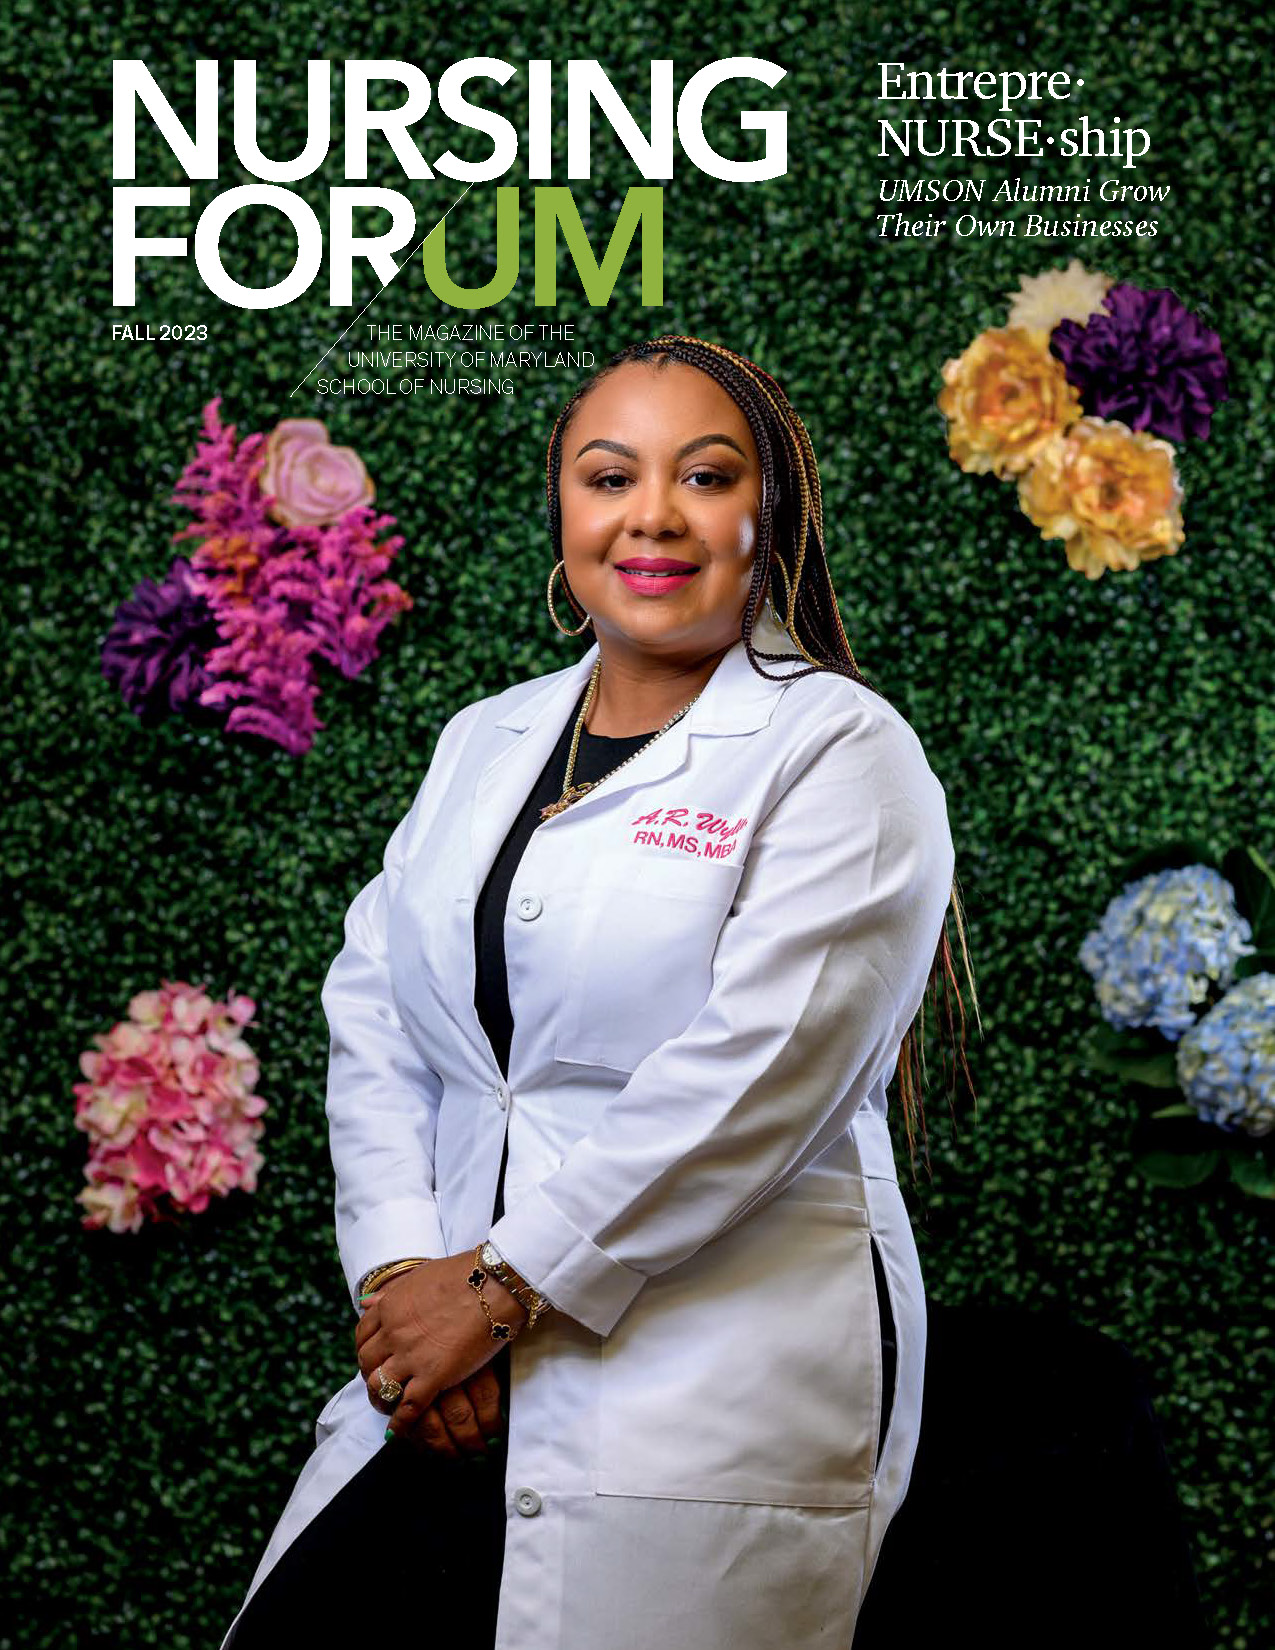 Fall 2023 Nursing For/um Issues Available in the UMSON Lobby The Elm